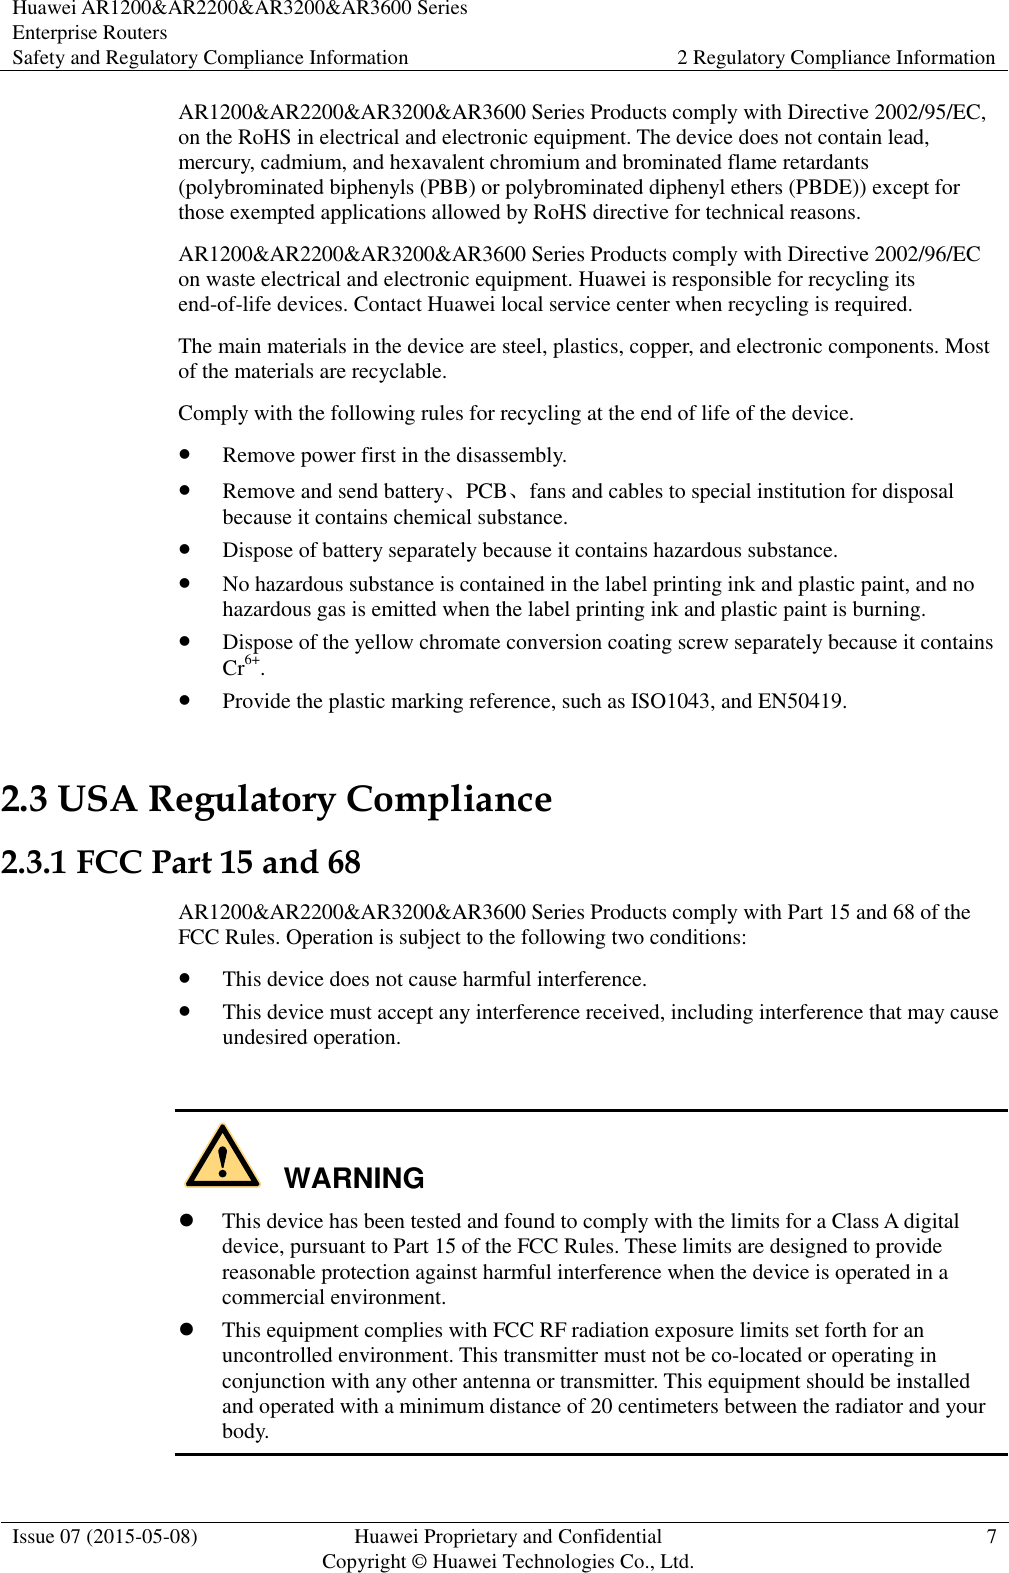 Huawei AR1200&amp;AR2200&amp;AR3200&amp;AR3600 Series Enterprise Routers Safety and Regulatory Compliance Information 2 Regulatory Compliance Information  Issue 07 (2015-05-08) Huawei Proprietary and Confidential           Copyright © Huawei Technologies Co., Ltd. 7  AR1200&amp;AR2200&amp;AR3200&amp;AR3600 Series Products comply with Directive 2002/95/EC, on the RoHS in electrical and electronic equipment. The device does not contain lead, mercury, cadmium, and hexavalent chromium and brominated flame retardants (polybrominated biphenyls (PBB) or polybrominated diphenyl ethers (PBDE)) except for those exempted applications allowed by RoHS directive for technical reasons. AR1200&amp;AR2200&amp;AR3200&amp;AR3600 Series Products comply with Directive 2002/96/EC on waste electrical and electronic equipment. Huawei is responsible for recycling its end-of-life devices. Contact Huawei local service center when recycling is required. The main materials in the device are steel, plastics, copper, and electronic components. Most of the materials are recyclable. Comply with the following rules for recycling at the end of life of the device.  Remove power first in the disassembly.  Remove and send battery、PCB、fans and cables to special institution for disposal because it contains chemical substance.  Dispose of battery separately because it contains hazardous substance.  No hazardous substance is contained in the label printing ink and plastic paint, and no hazardous gas is emitted when the label printing ink and plastic paint is burning.  Dispose of the yellow chromate conversion coating screw separately because it contains Cr6+.  Provide the plastic marking reference, such as ISO1043, and EN50419. 2.3 USA Regulatory Compliance 2.3.1 FCC Part 15 and 68 AR1200&amp;AR2200&amp;AR3200&amp;AR3600 Series Products comply with Part 15 and 68 of the FCC Rules. Operation is subject to the following two conditions:  This device does not cause harmful interference.  This device must accept any interference received, including interference that may cause undesired operation.      This device has been tested and found to comply with the limits for a Class A digital device, pursuant to Part 15 of the FCC Rules. These limits are designed to provide reasonable protection against harmful interference when the device is operated in a commercial environment.  This equipment complies with FCC RF radiation exposure limits set forth for an uncontrolled environment. This transmitter must not be co-located or operating in conjunction with any other antenna or transmitter. This equipment should be installed and operated with a minimum distance of 20 centimeters between the radiator and your body. WARNING